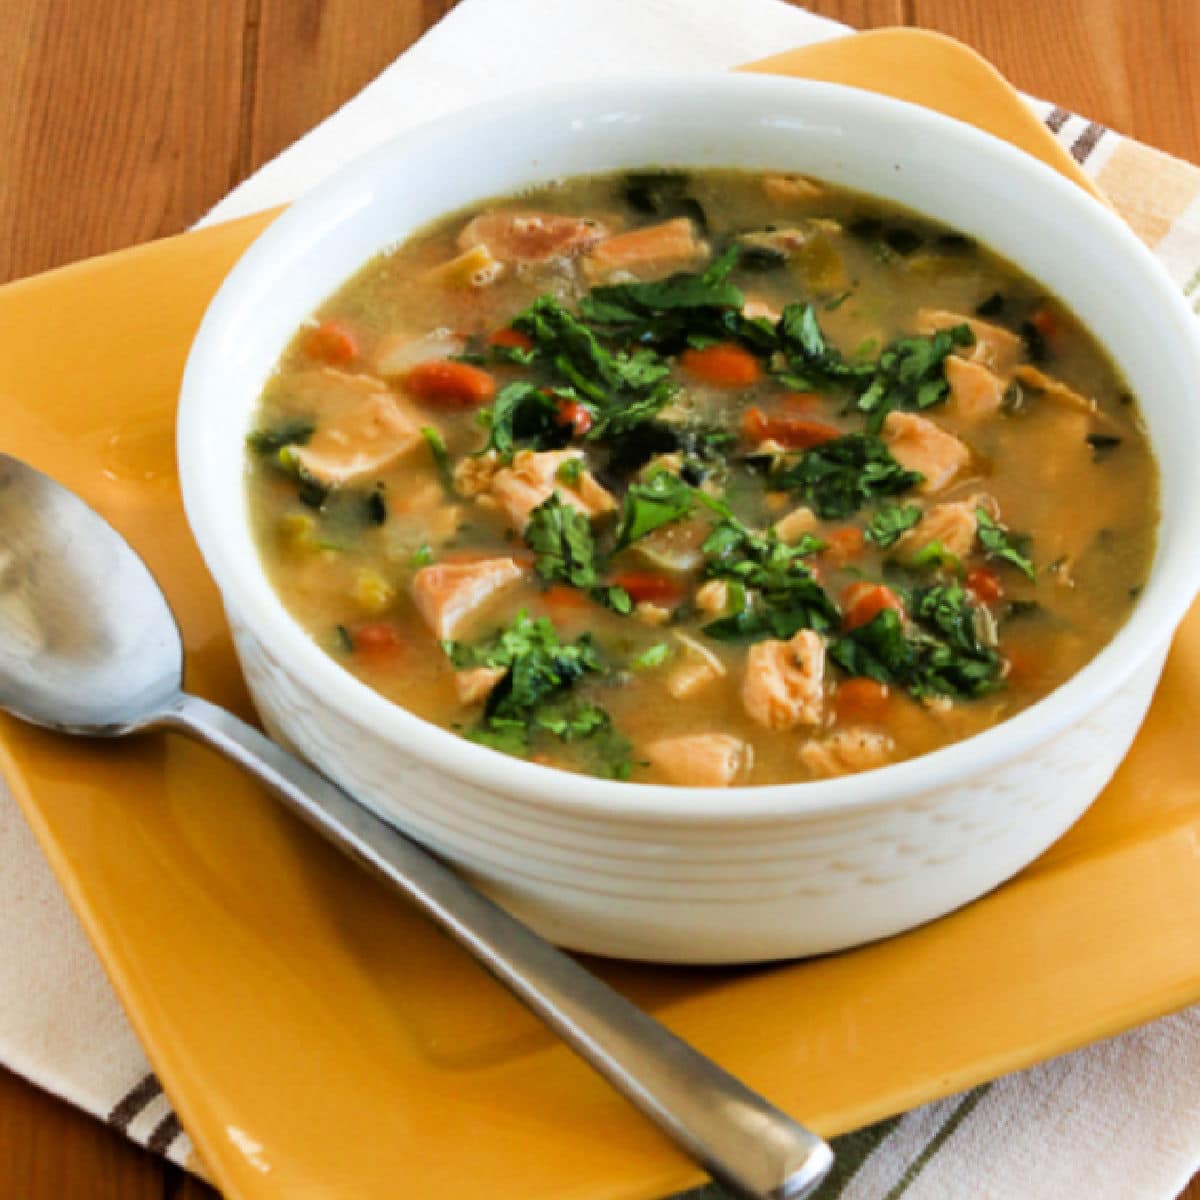 Square image of Mexican Chicken Soup shown in bowl with spoon, garnished with chopped fresh cilantro.